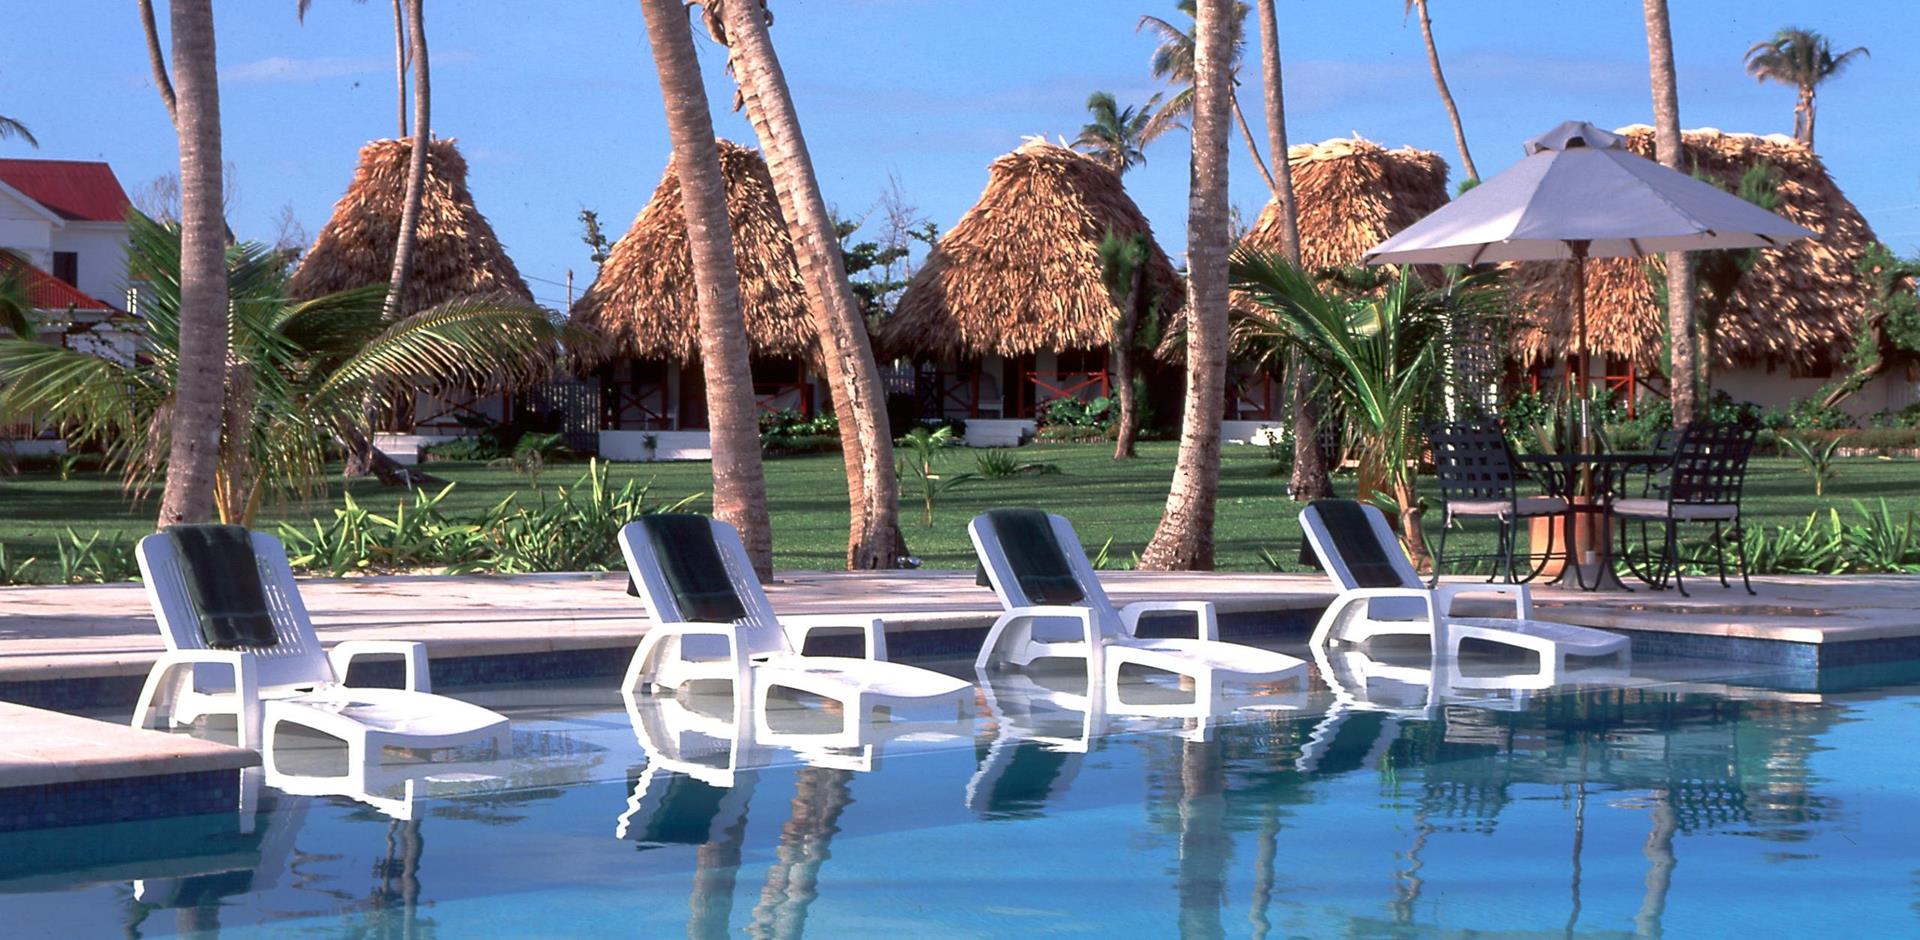 Sun loungers and pool, Victoria House Resort & Spa, The Cayes, Belize, Central America